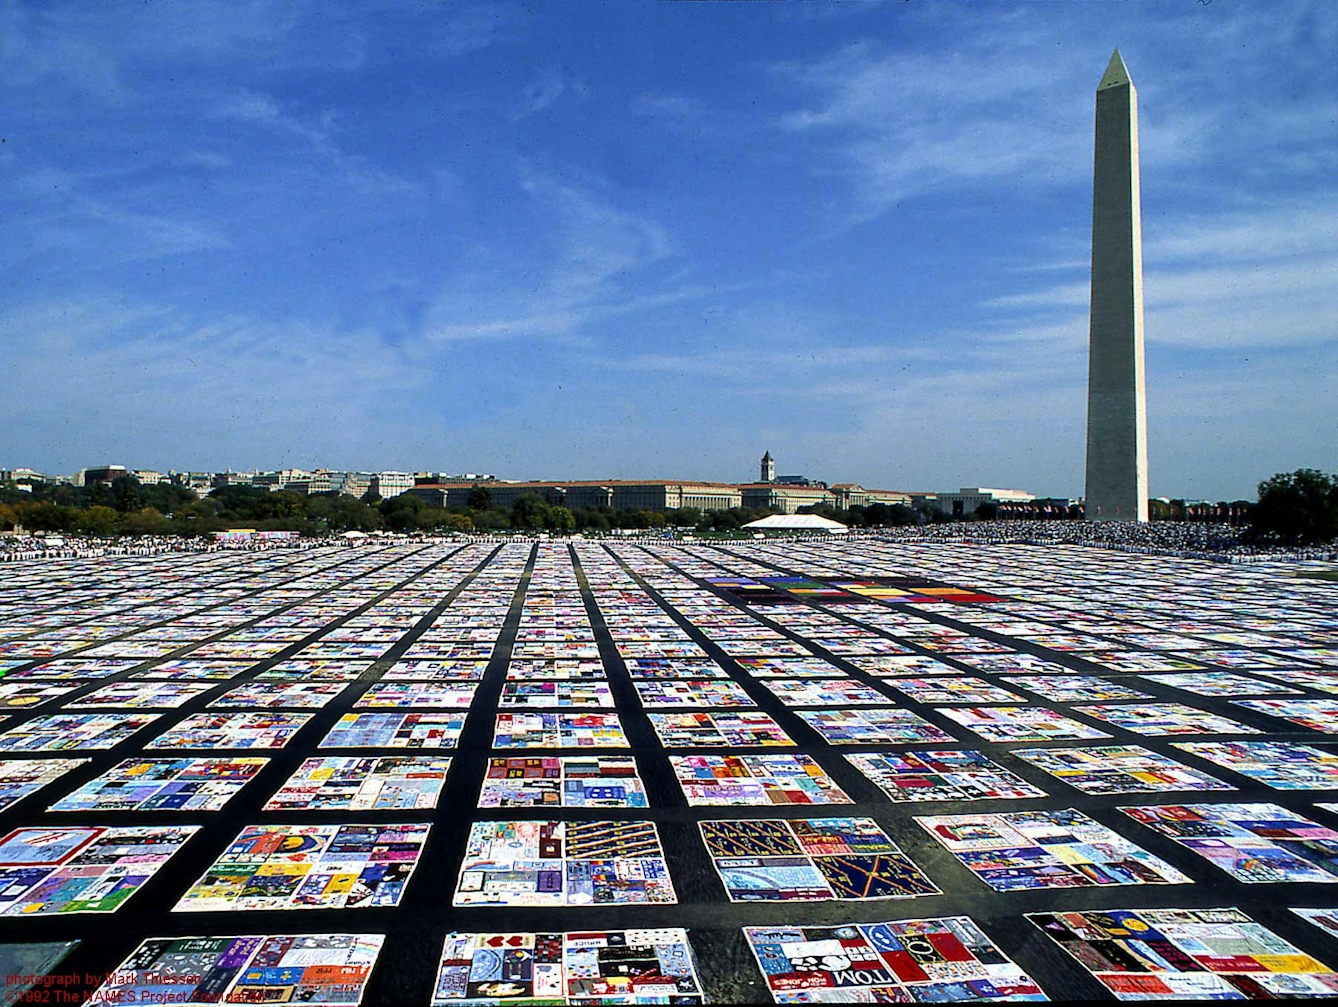 Picture of the AIDS quilt in front of the Washington Monument on a sunny day